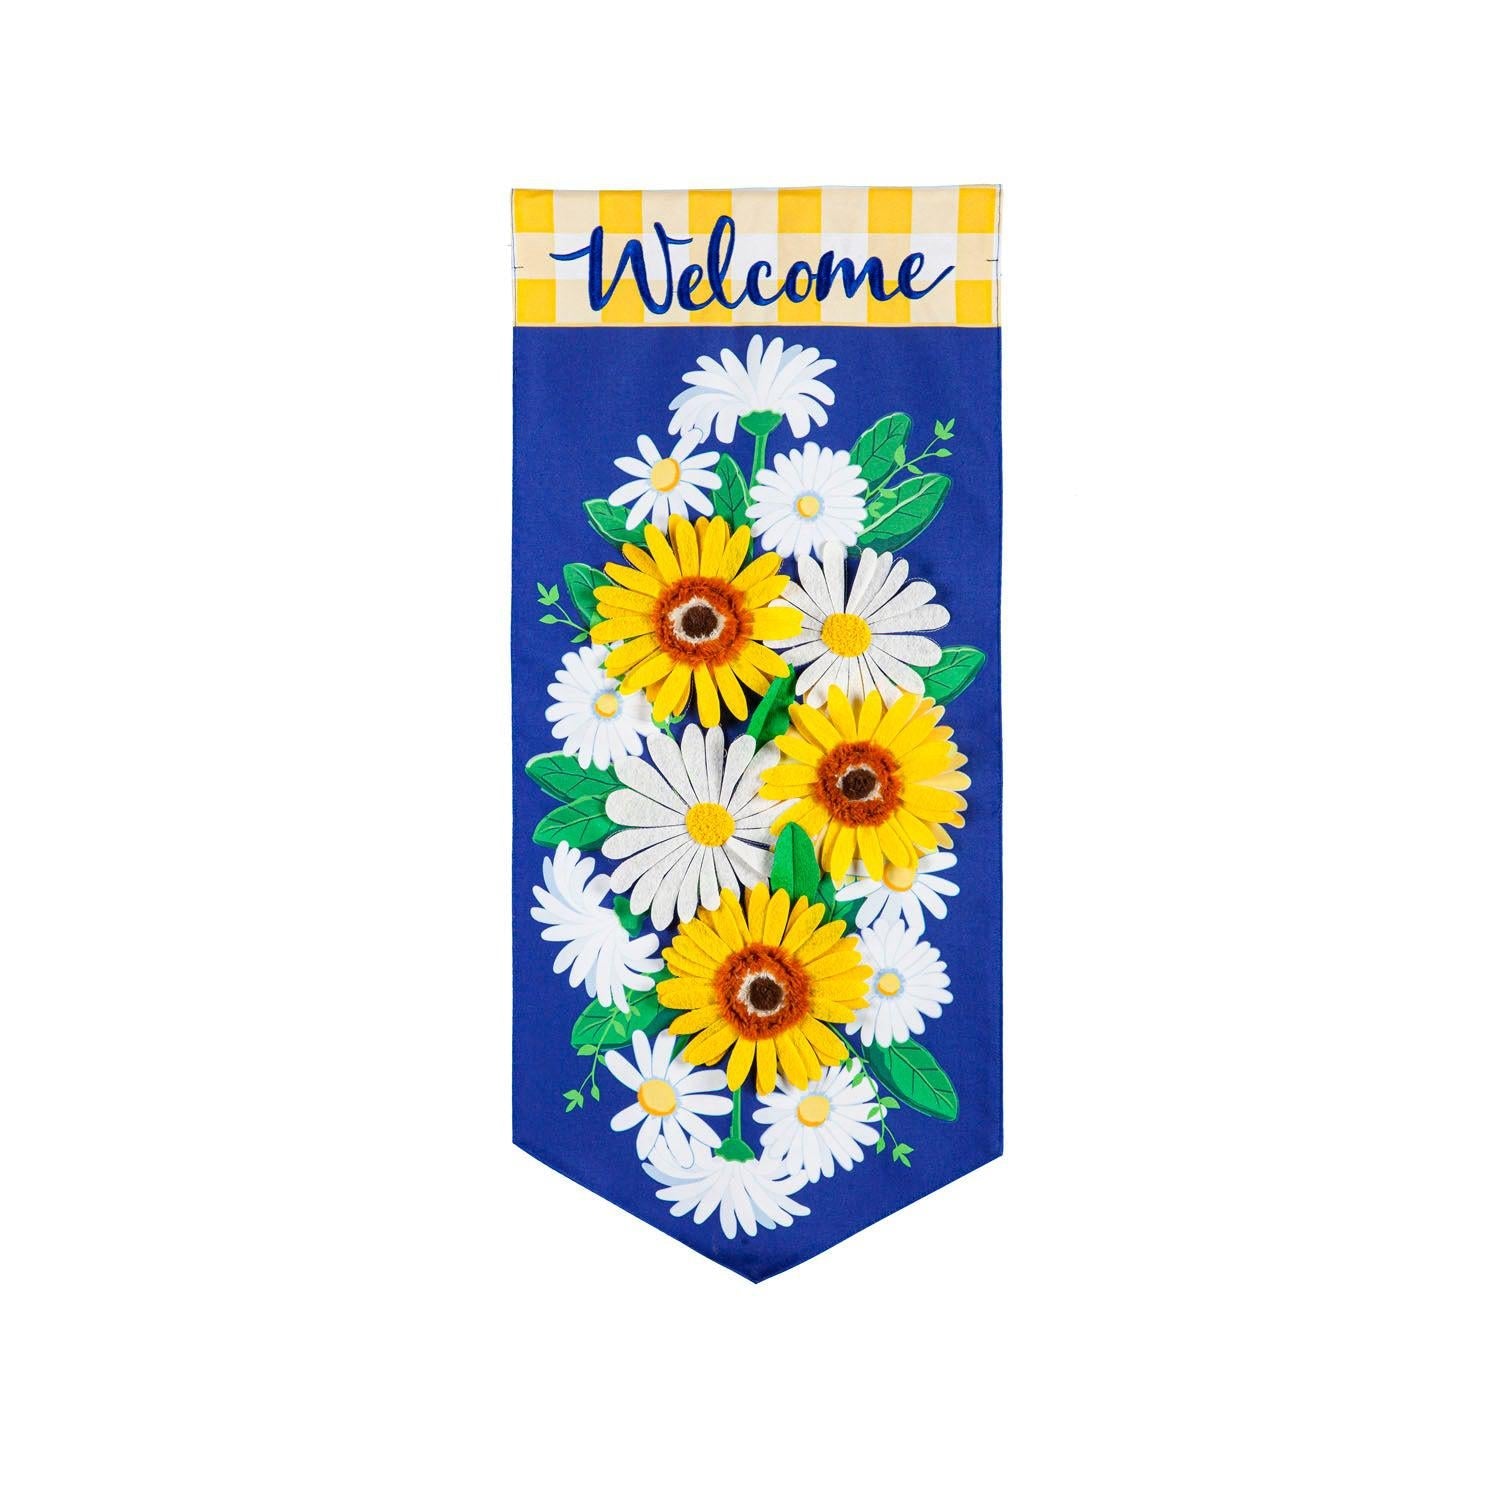 Enjoy the season with the Royal Checks and Daisies Textile Décor from the Everlasting Impressions collection. This extra-long garden flag features beautiful white and yellow daisies on a royal blue background and the word "Welcome" with 3D details.